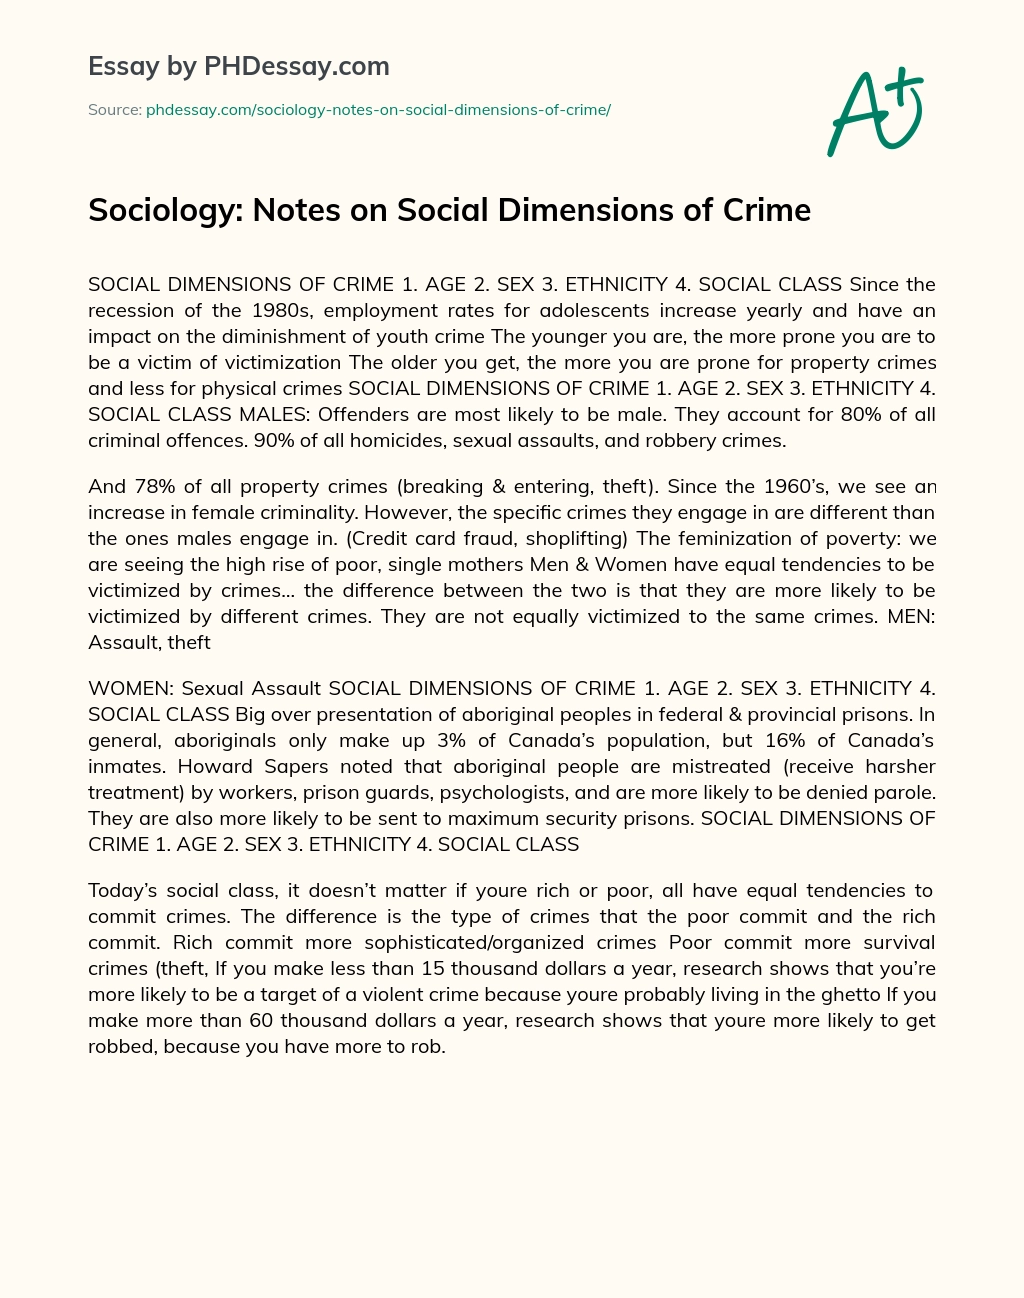 Sociology: Notes on Social Dimensions of Crime essay